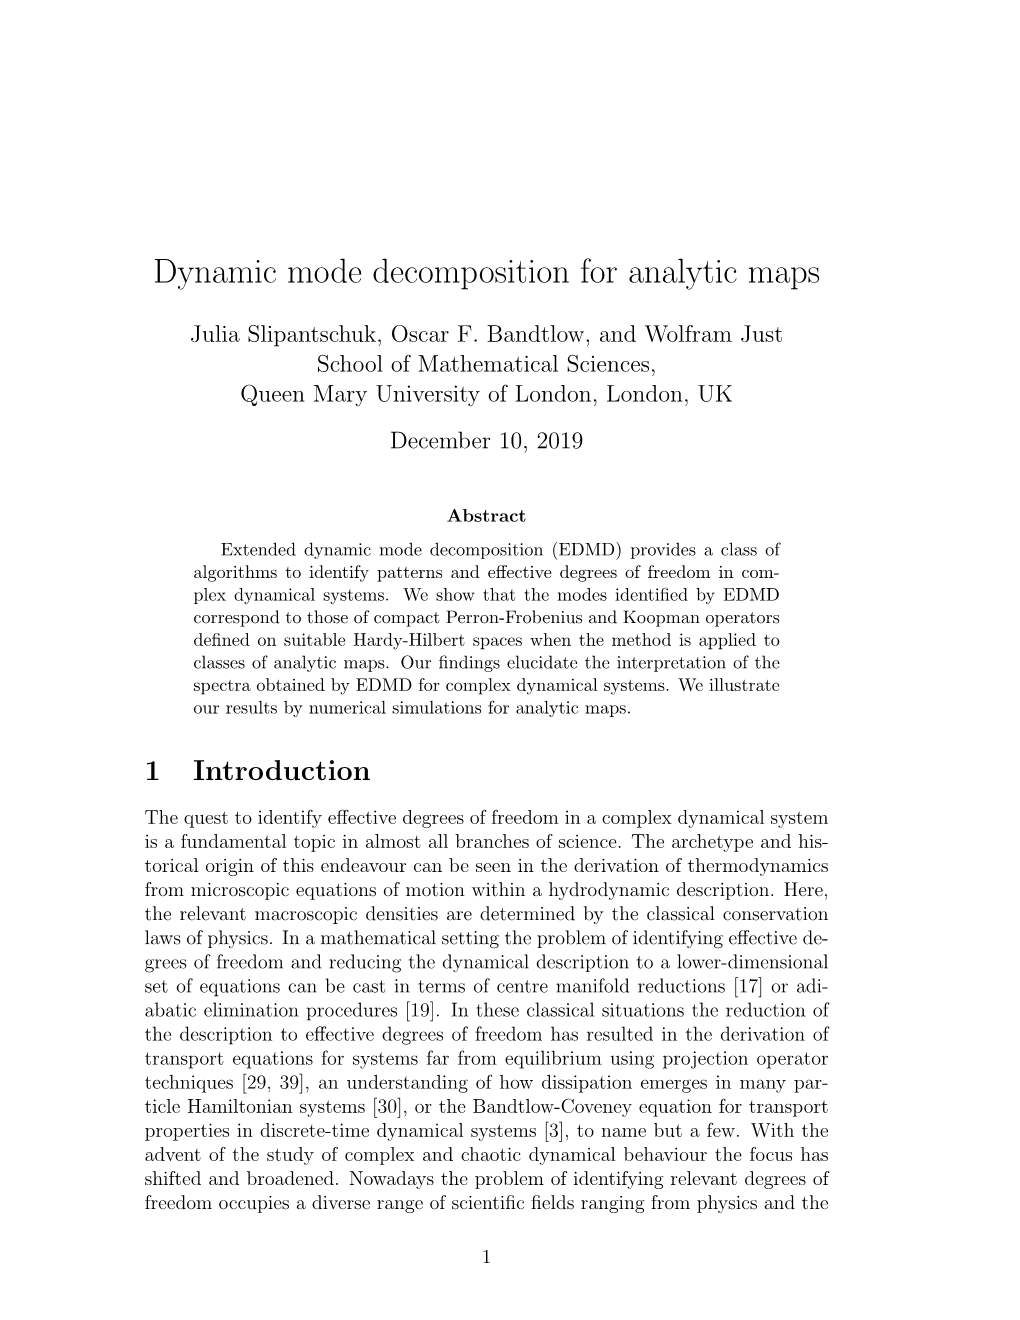 Dynamic Mode Decomposition for Analytic Maps